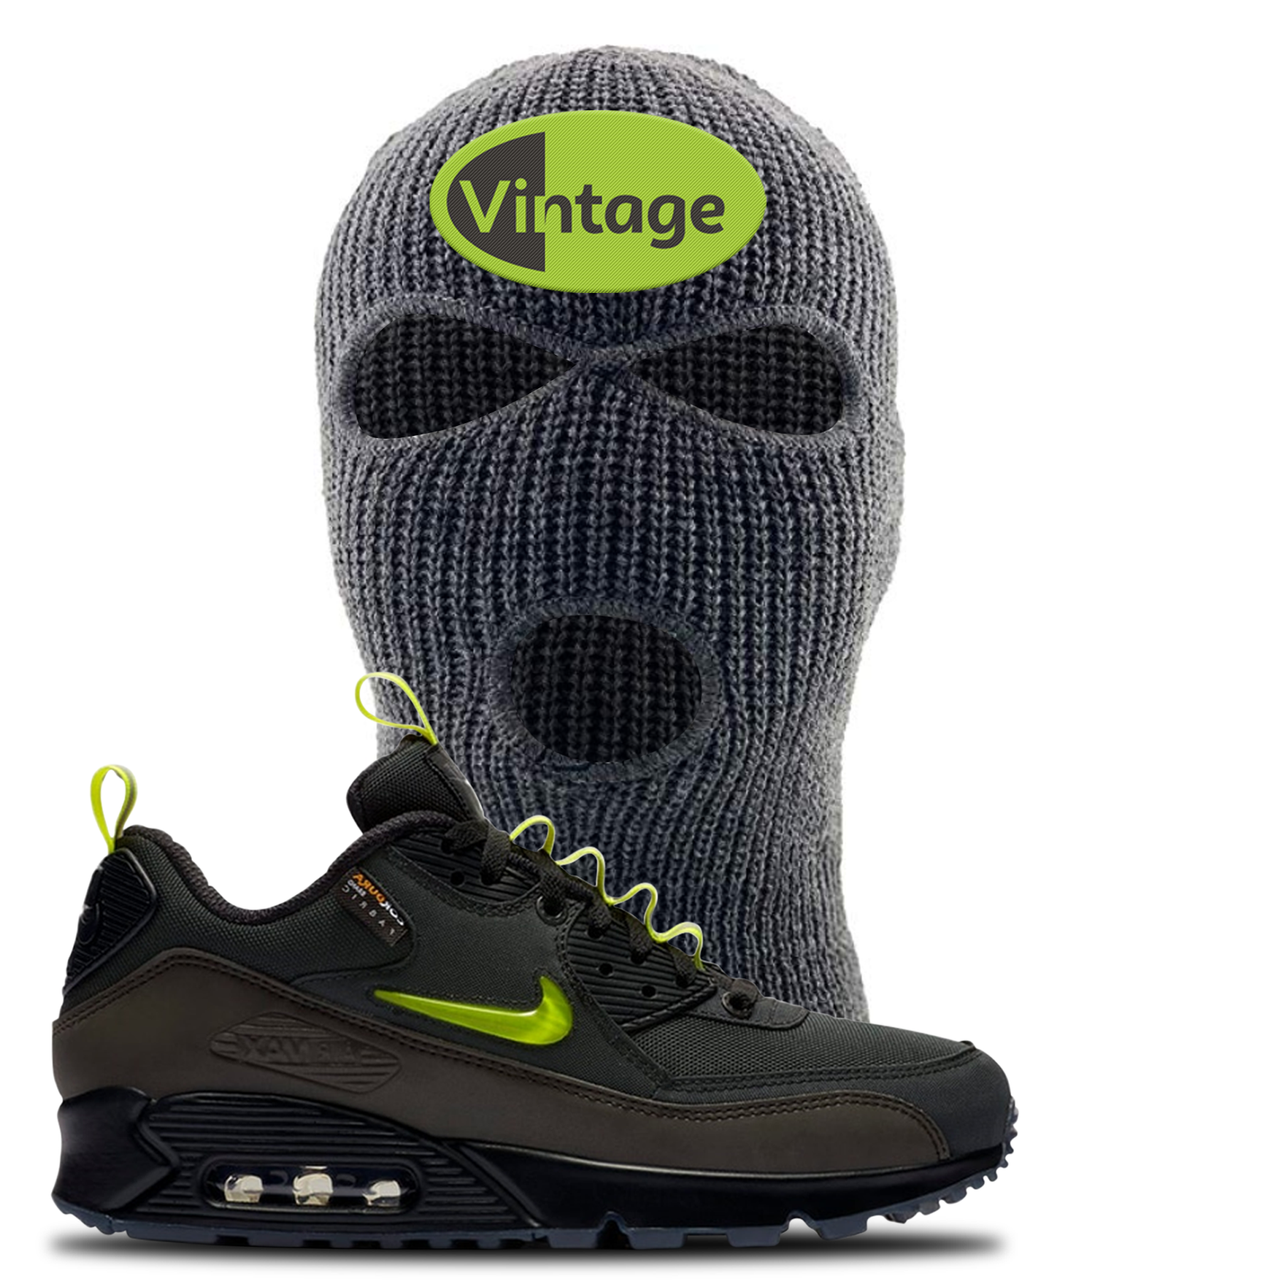 The Basement X Air Max 90 Manchester Vintage Oval Dark Gray Sneaker Hook Up Ski Mask